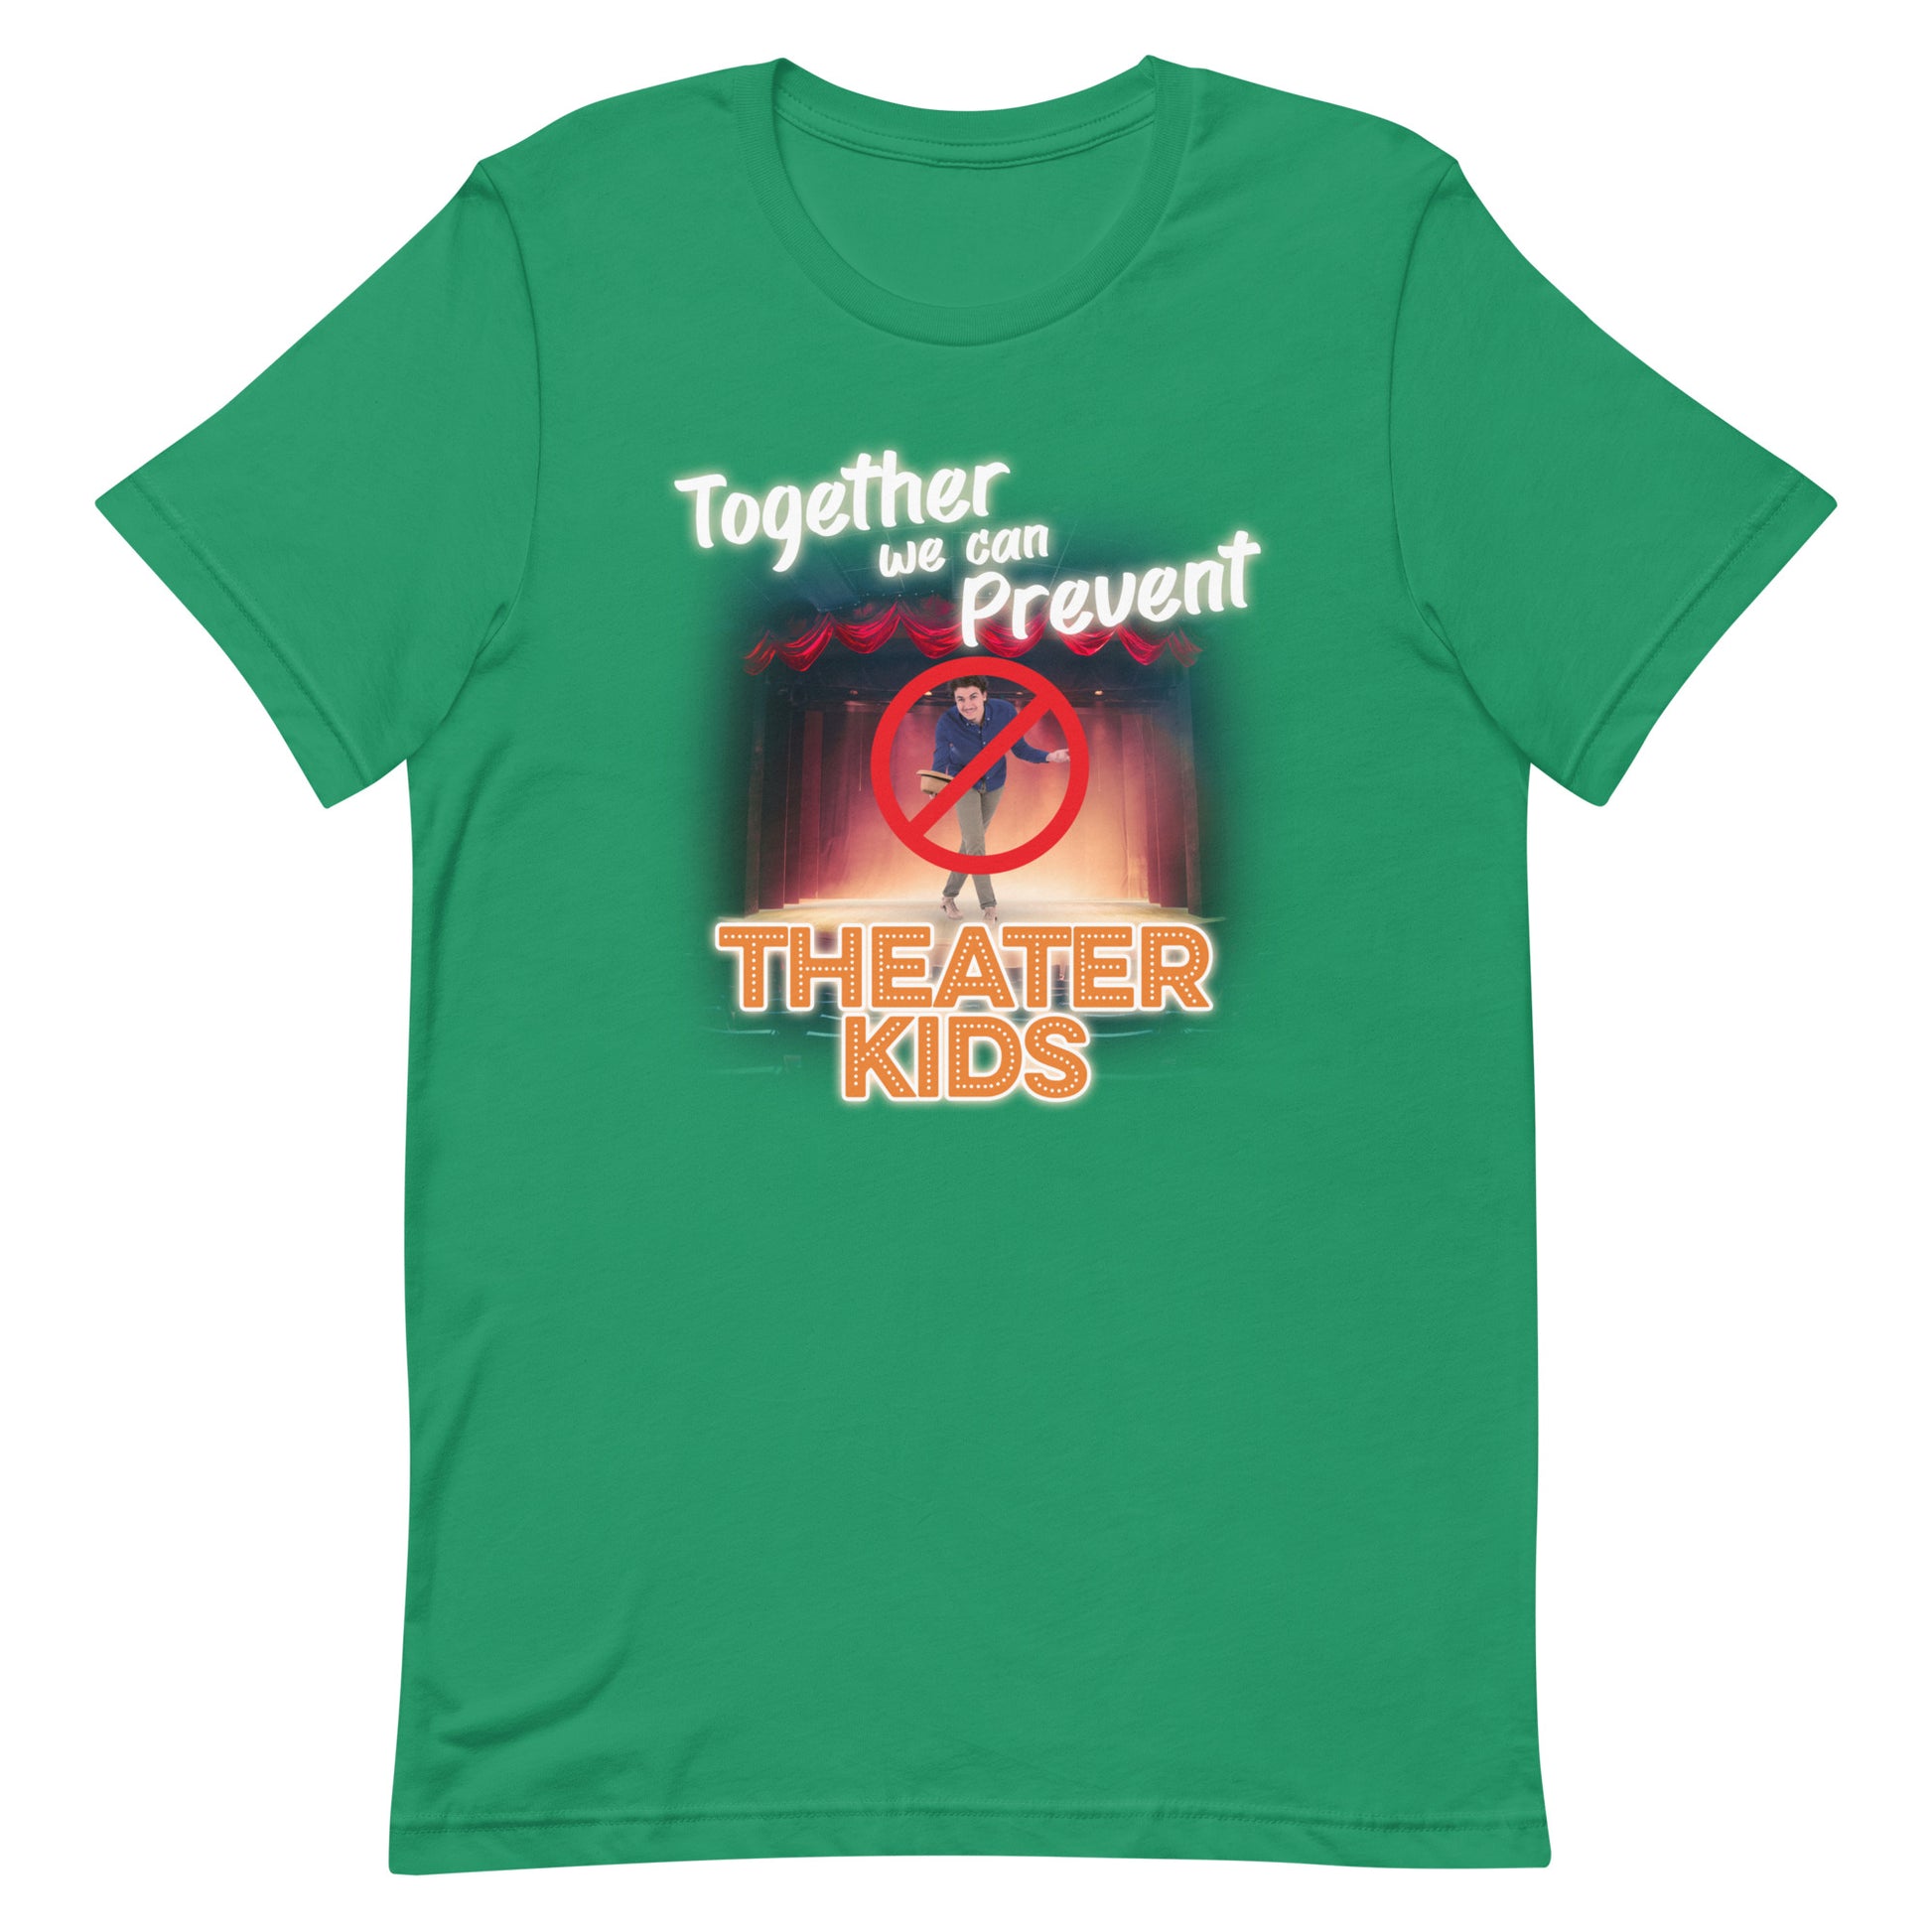 Together We Theater Kids t-shirt Got – Funny? Can Unisex Prevent